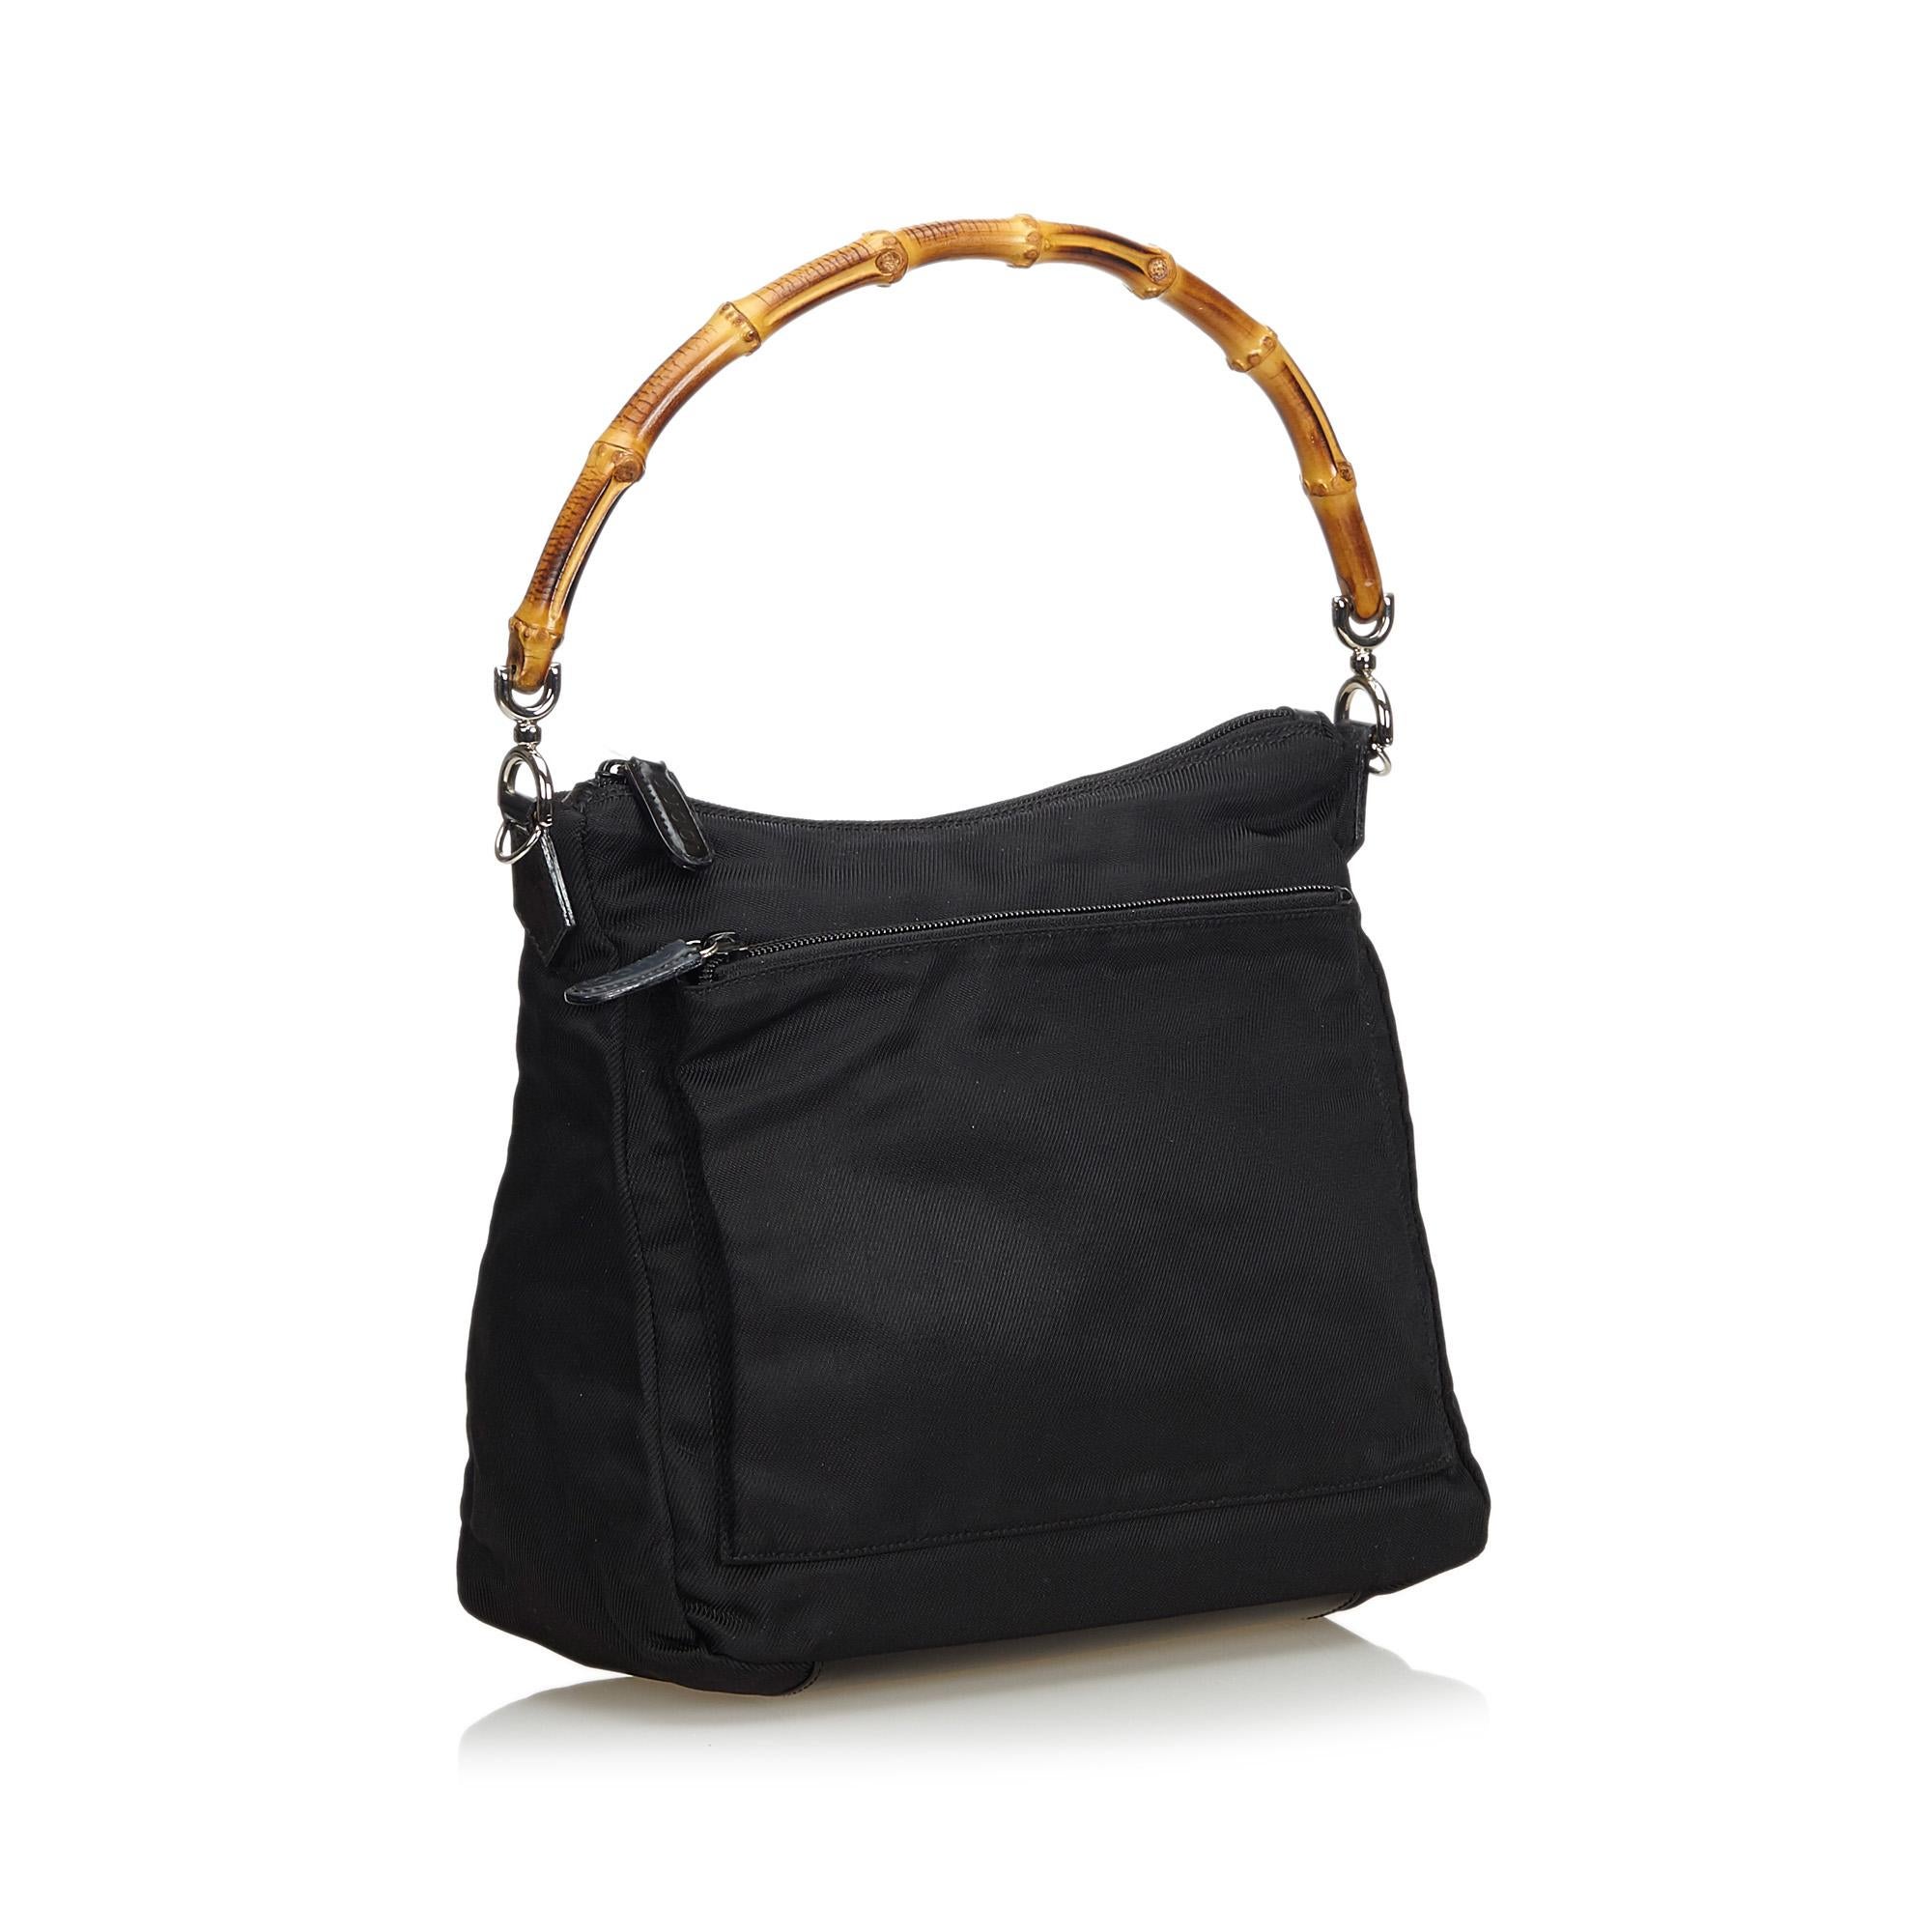 This satchel features a nylon body, an exterior zip pocket, a bamboo top handle, a flat leather strap, a top zip closure, and interior zip pocket. It carries as B+ condition rating.

Inclusions: 
This item does not come with